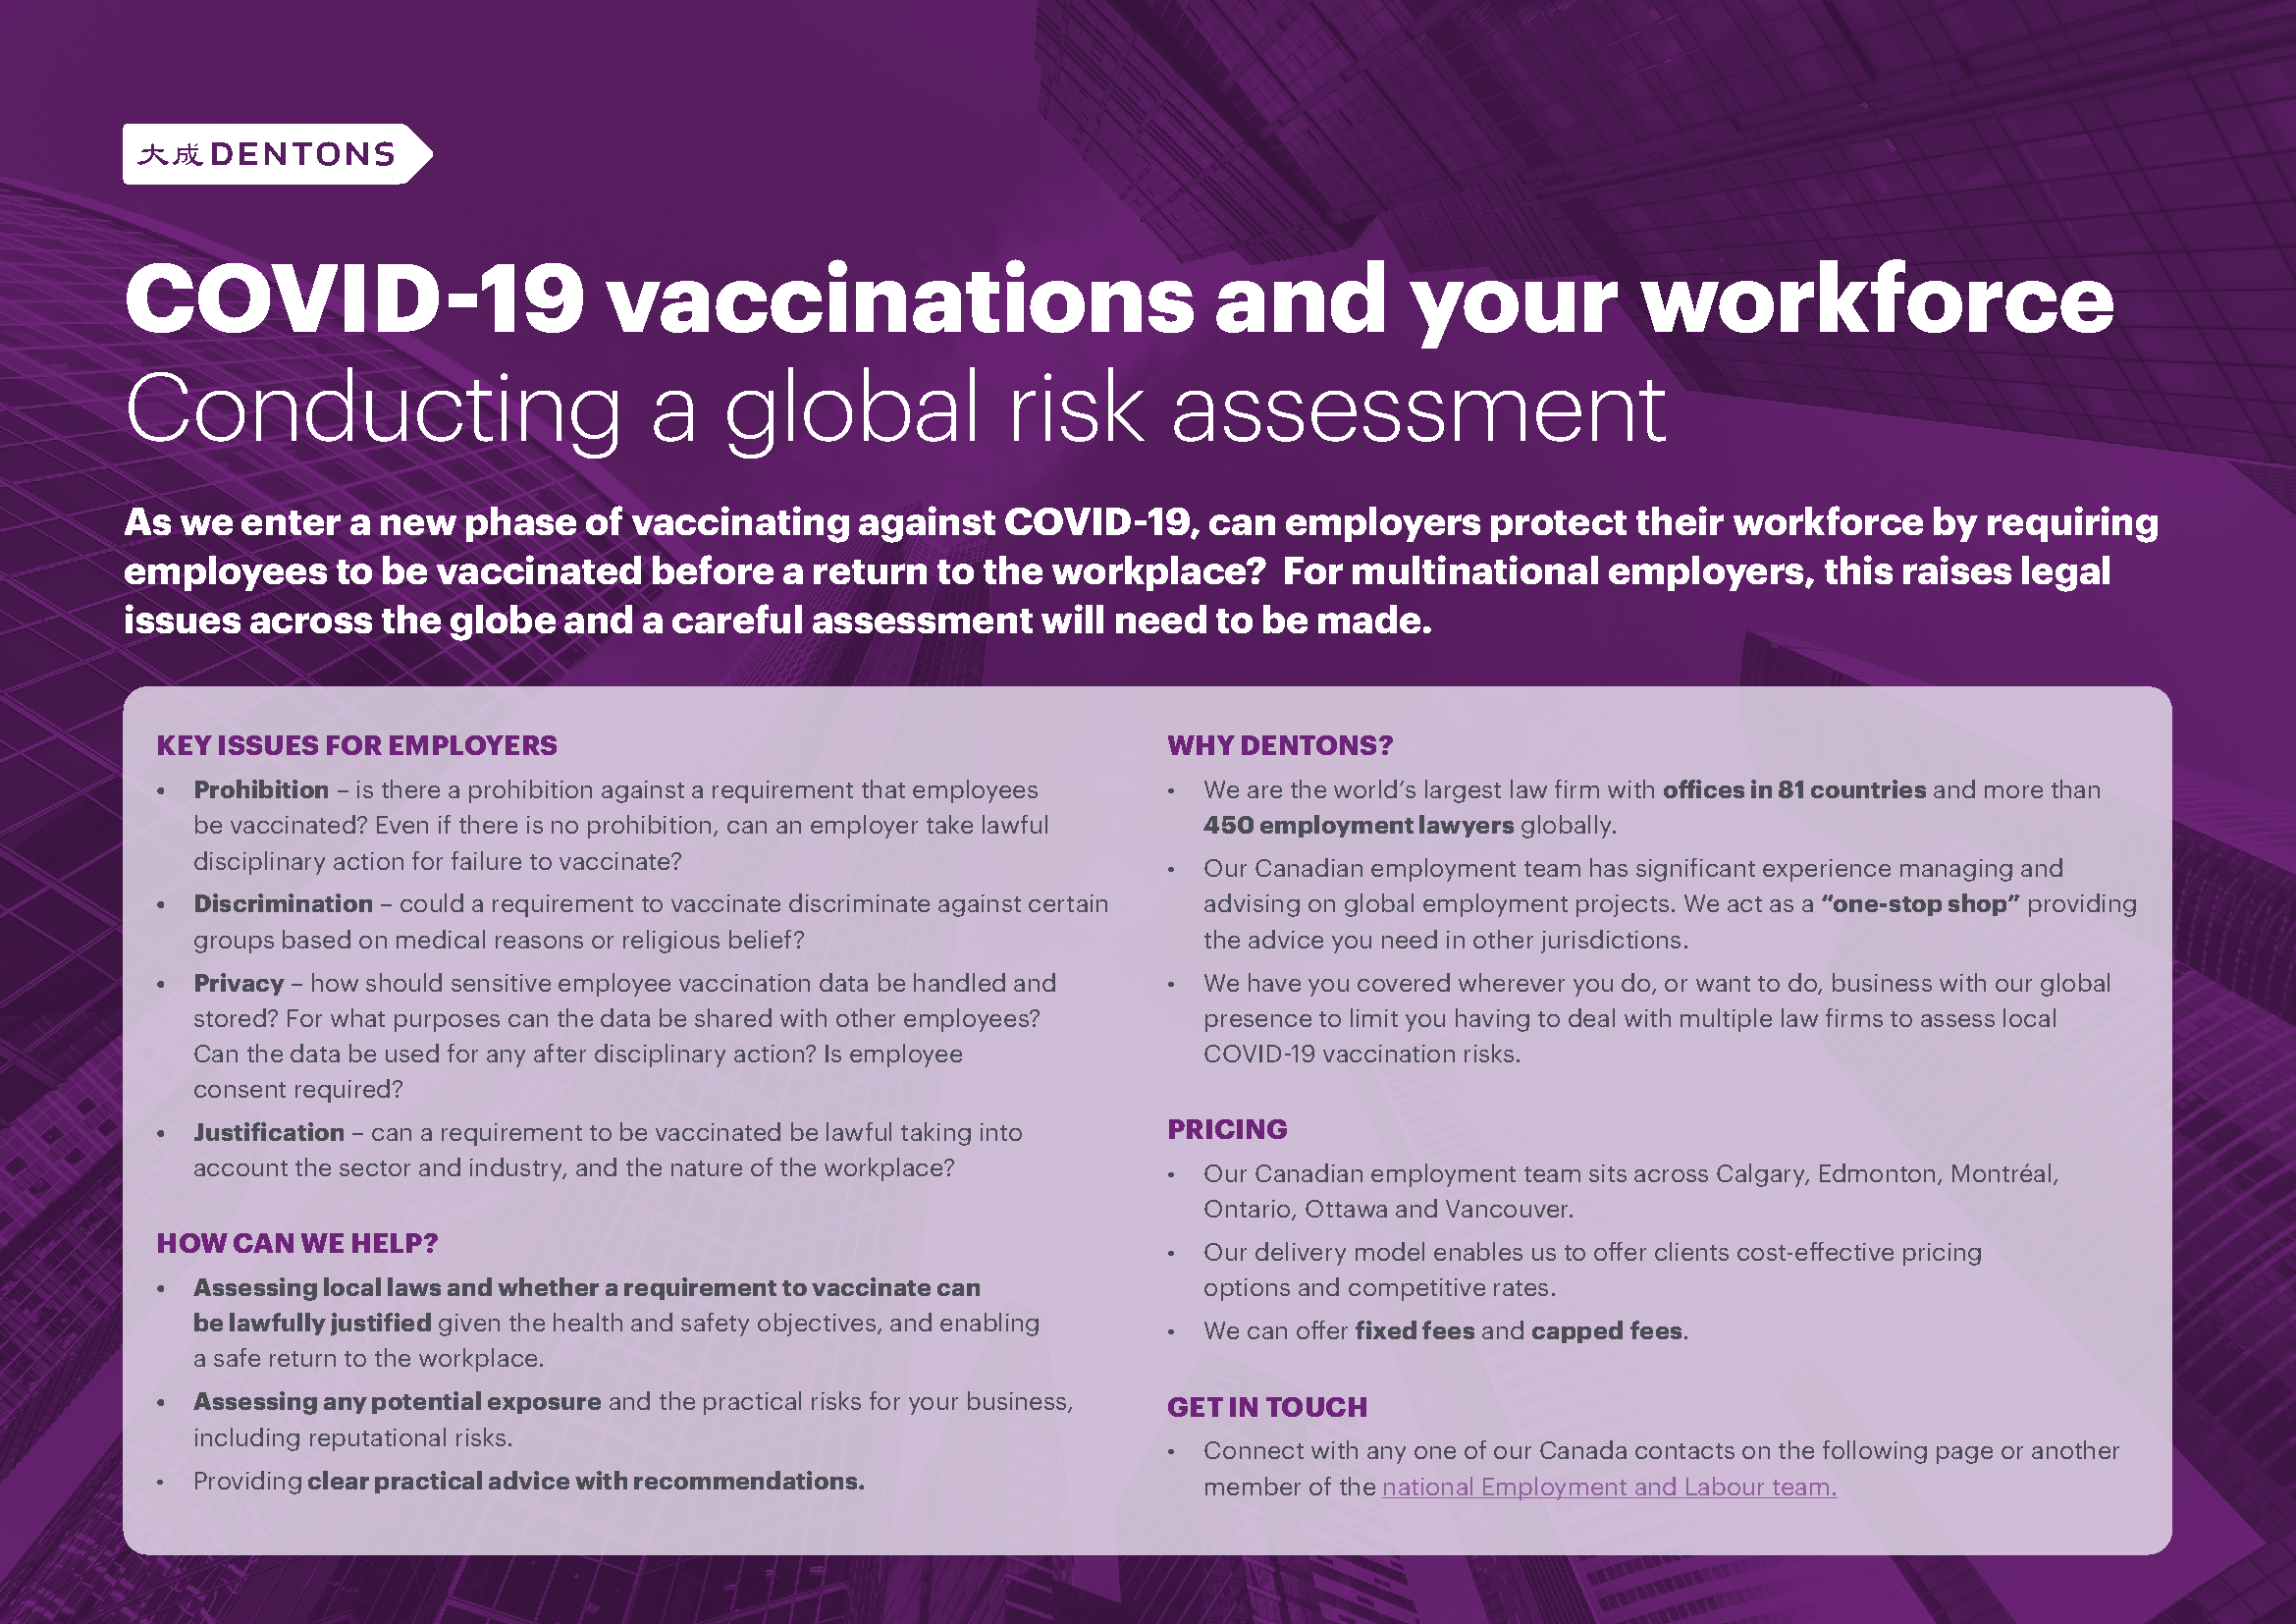 COVID-19 Vaccinations and Your Workforce_1